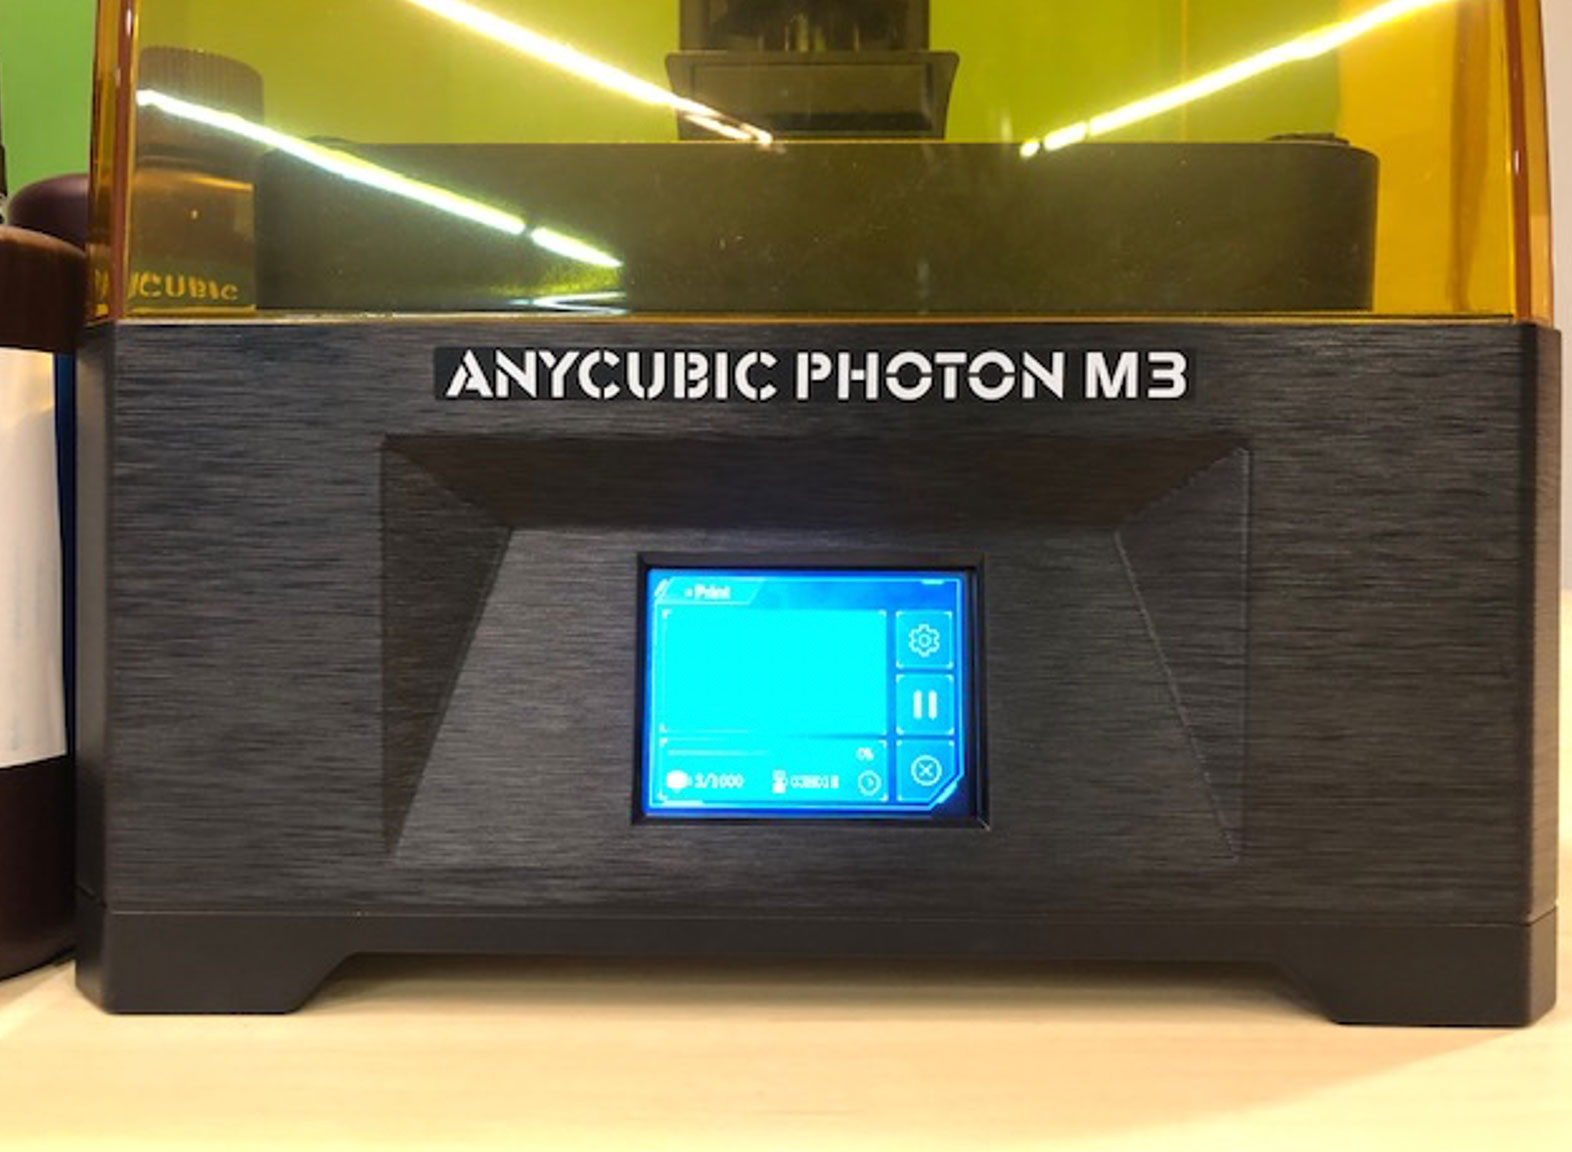 Touchscreen des Anycubic Photon M3